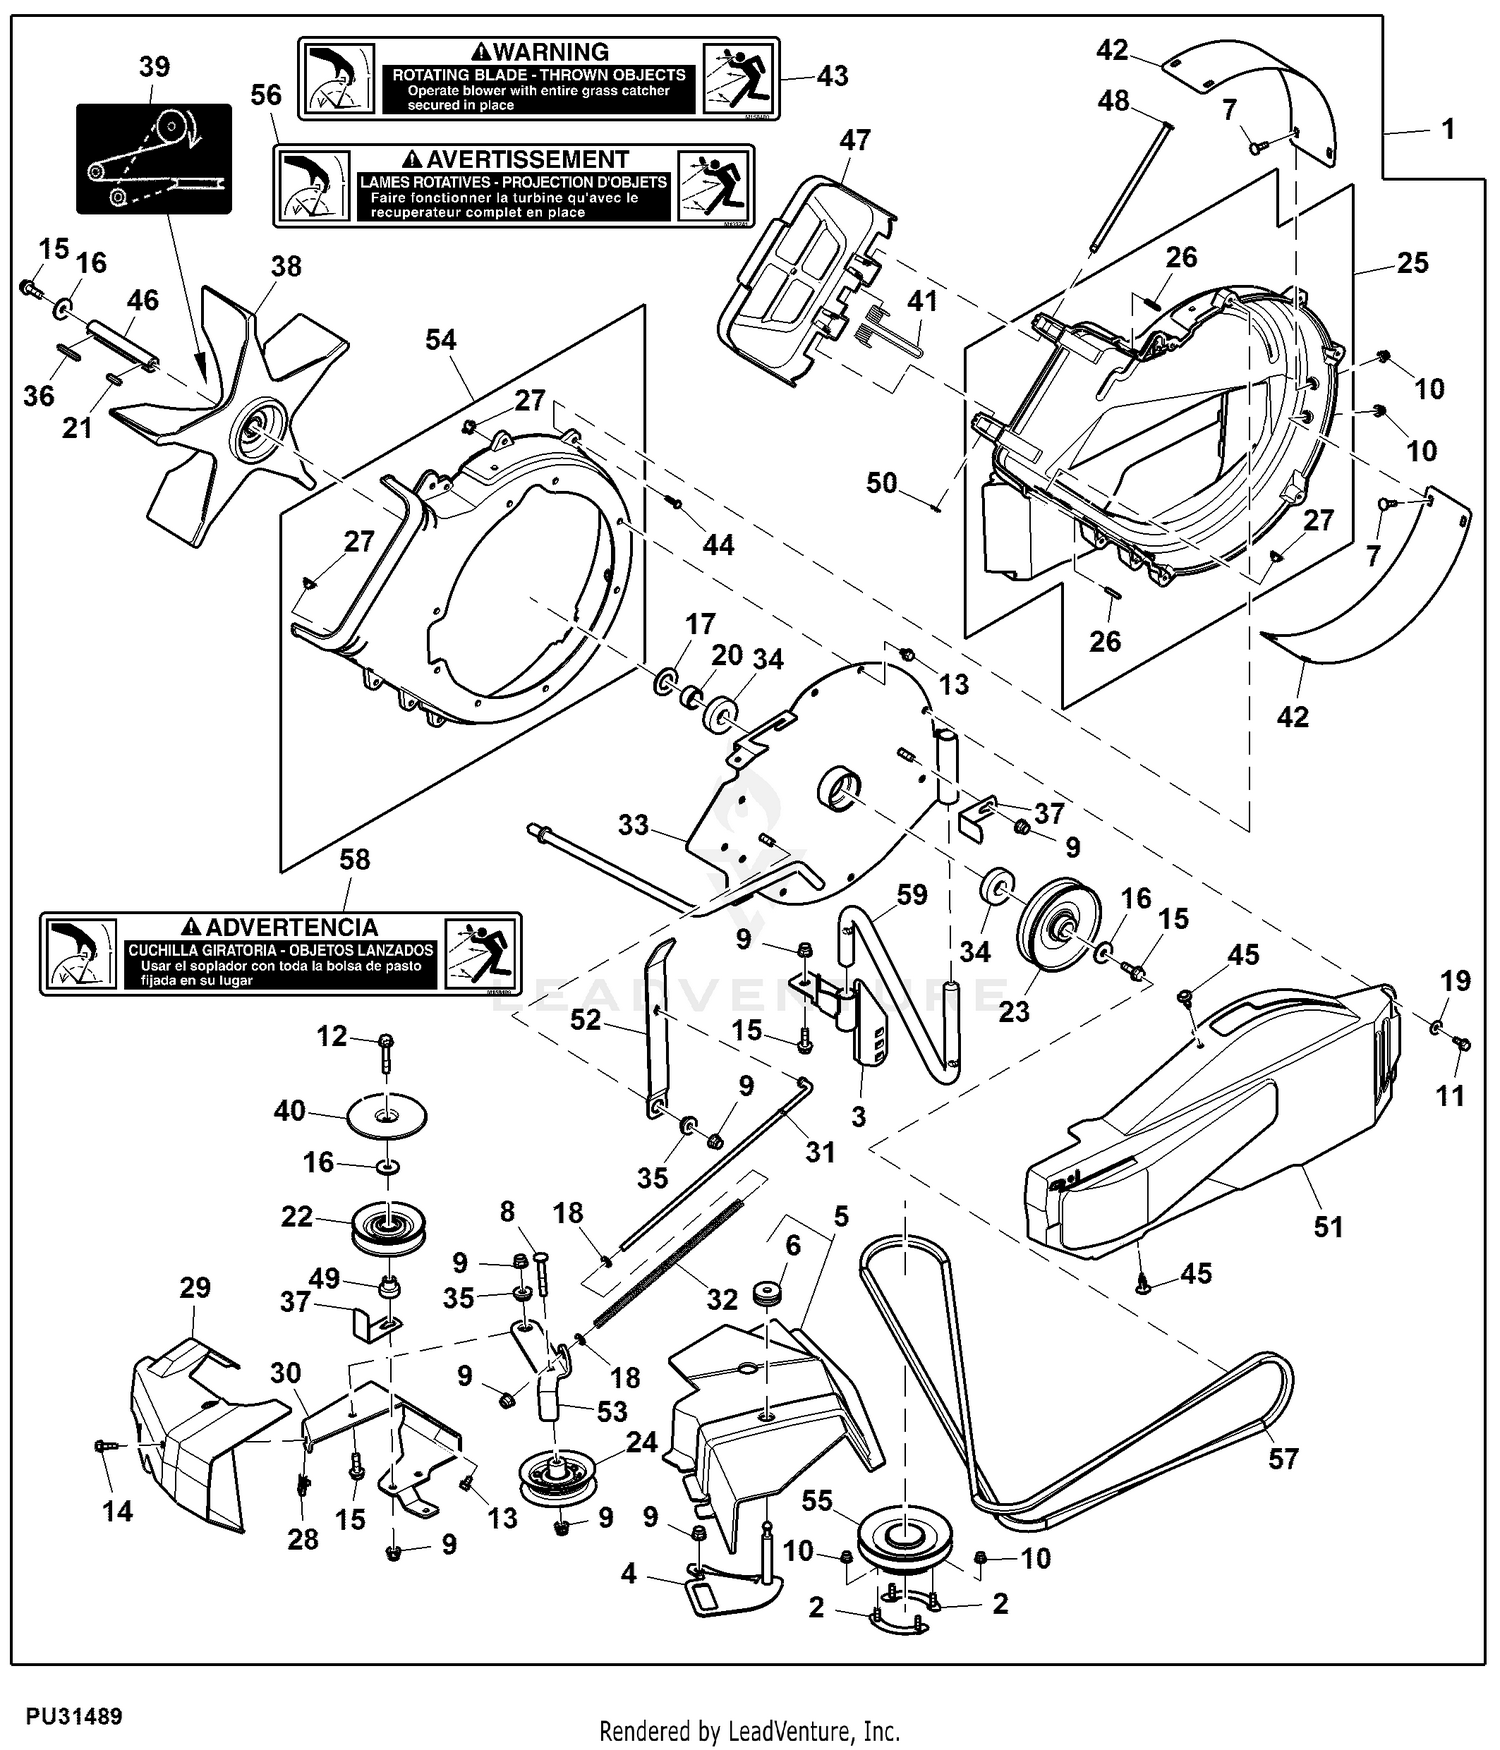 John Deere Material Collection System Power Flow Kit, 54 inch